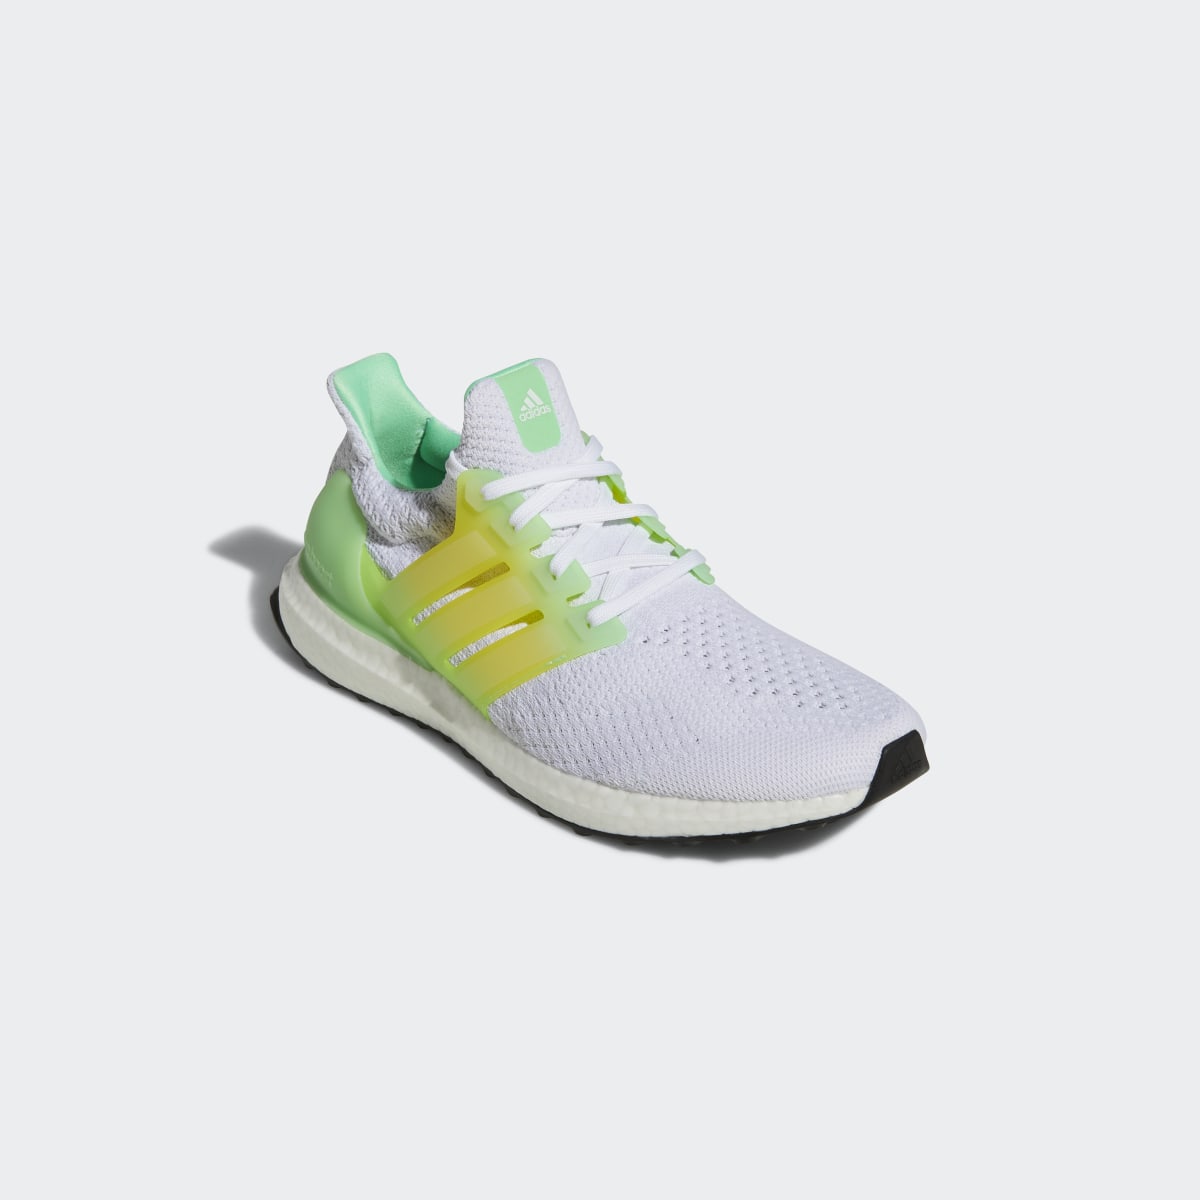 Adidas Ultraboost 5.0 DNA Shoes. 5